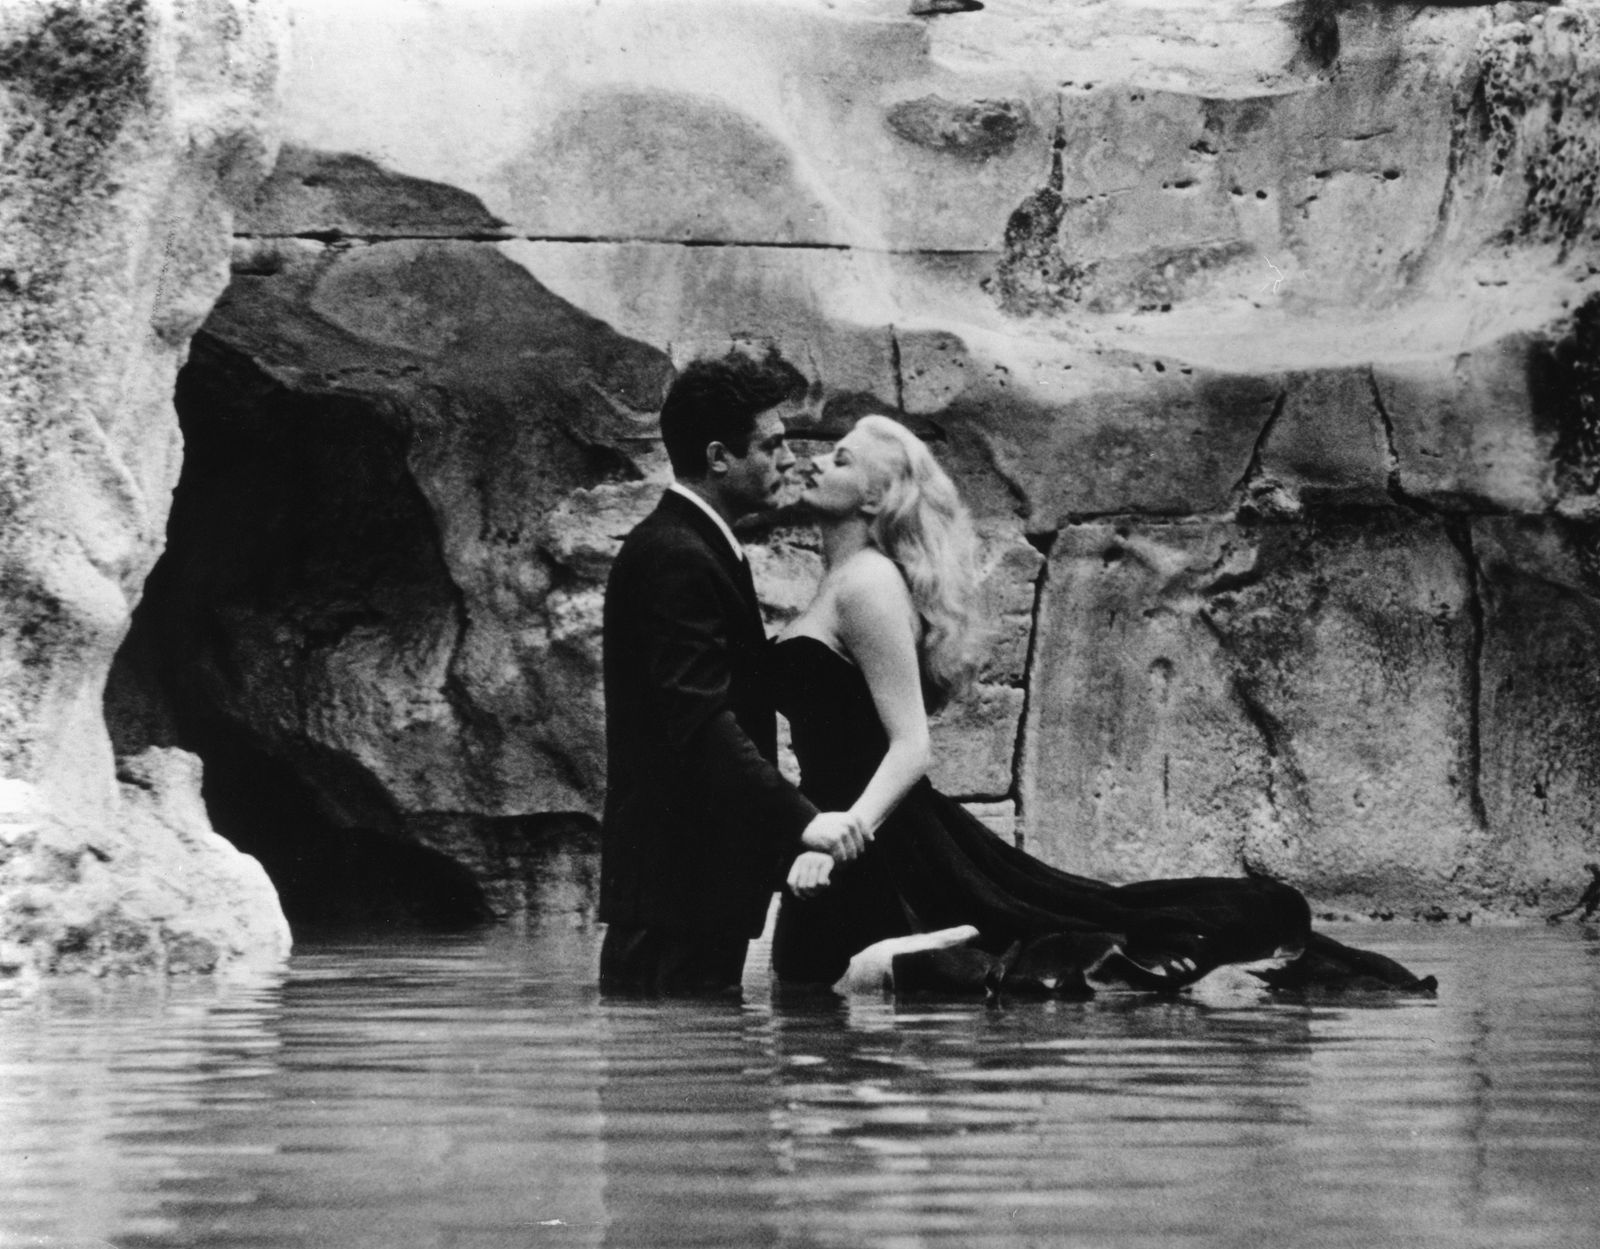 Competition! Win La Dolce Vita and Four Other Criterion Collection Classic Films and Support The Luminaries Magazine